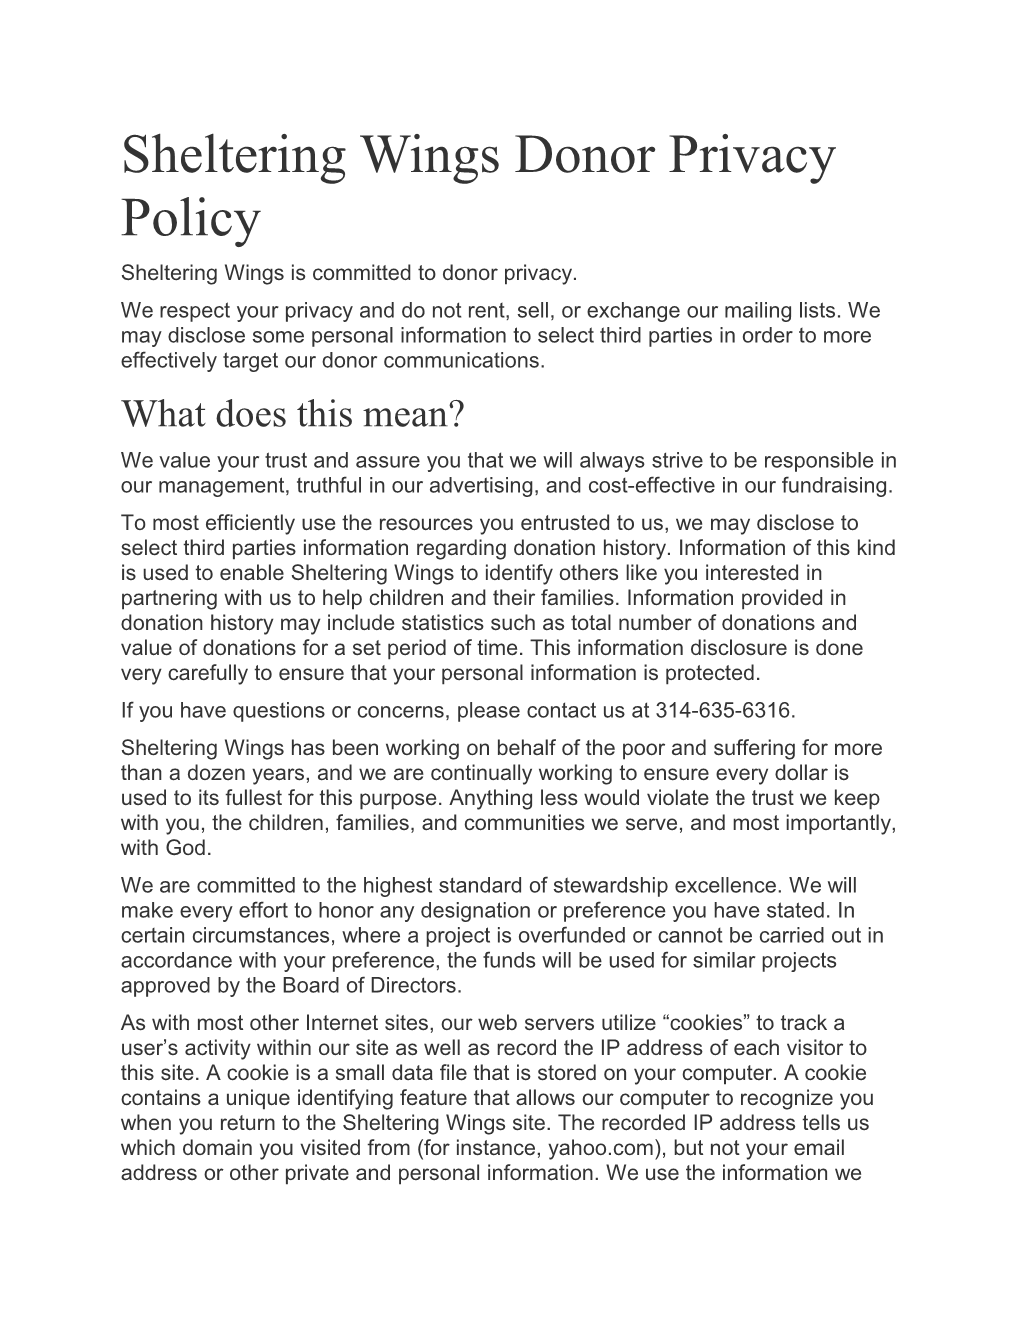 Sheltering Wings Donor Privacy Policy